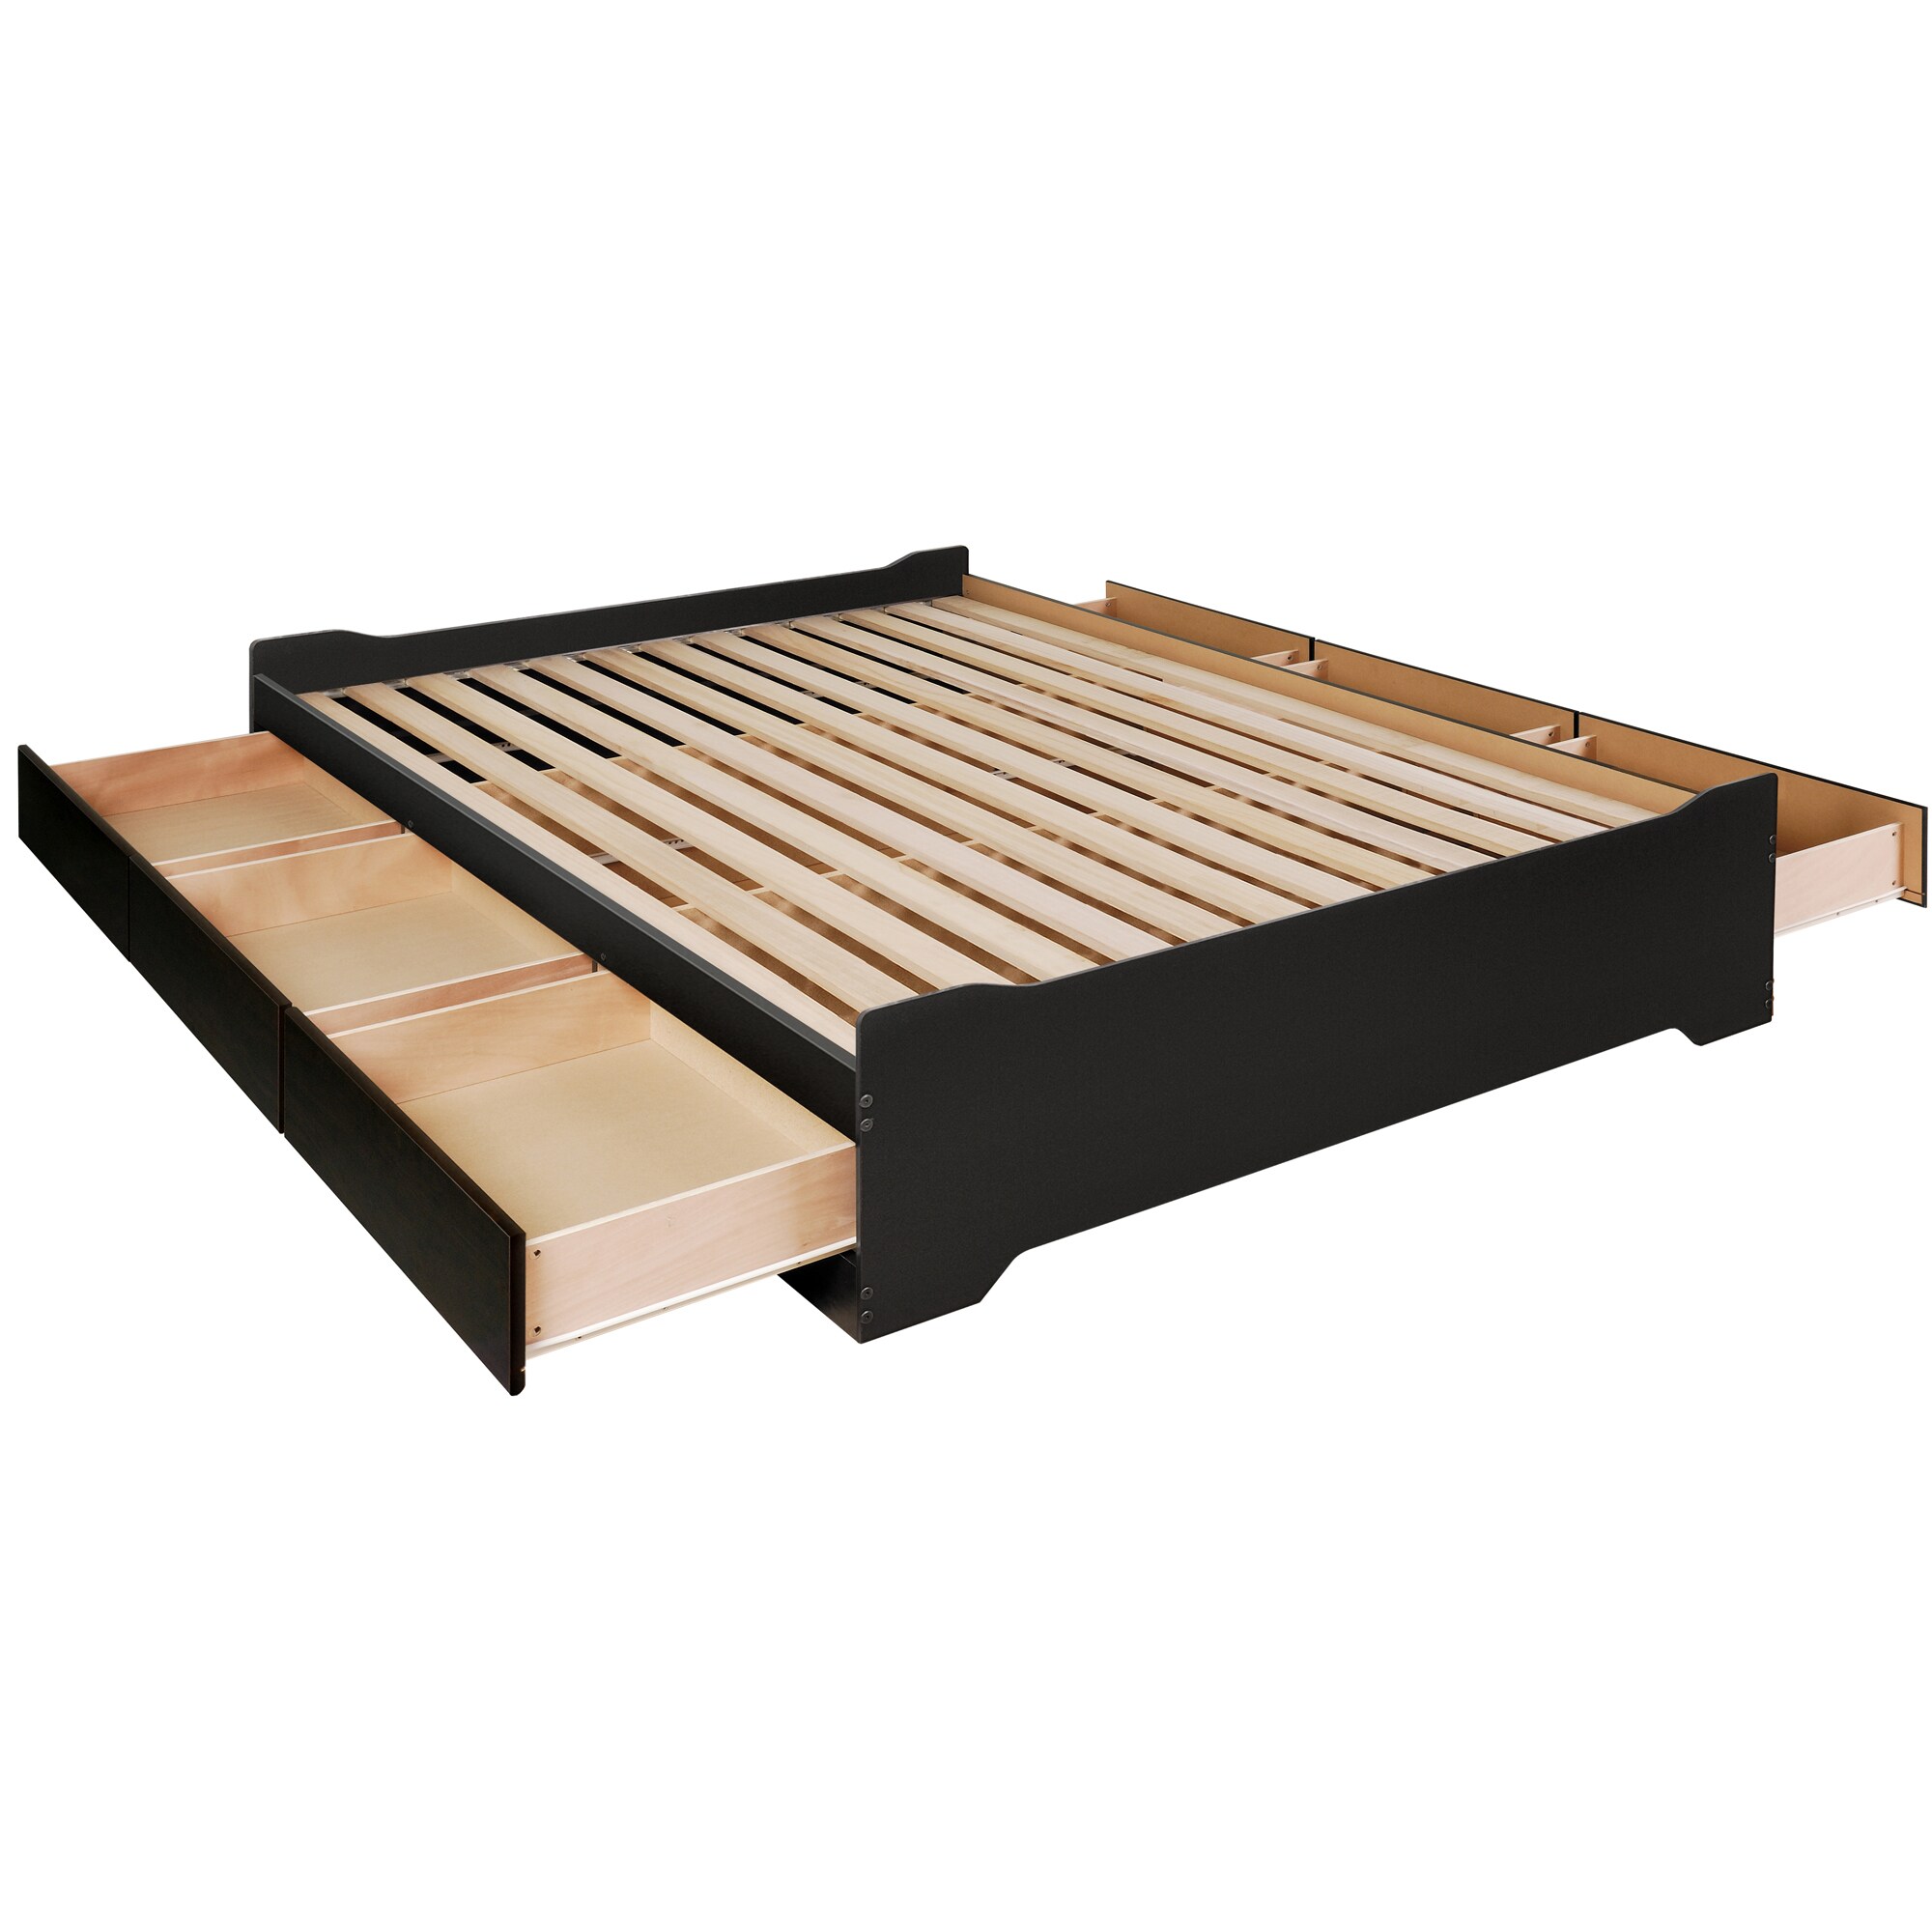 Prepac Mate's Black Full Composite Platform Bed with Storage in the ...